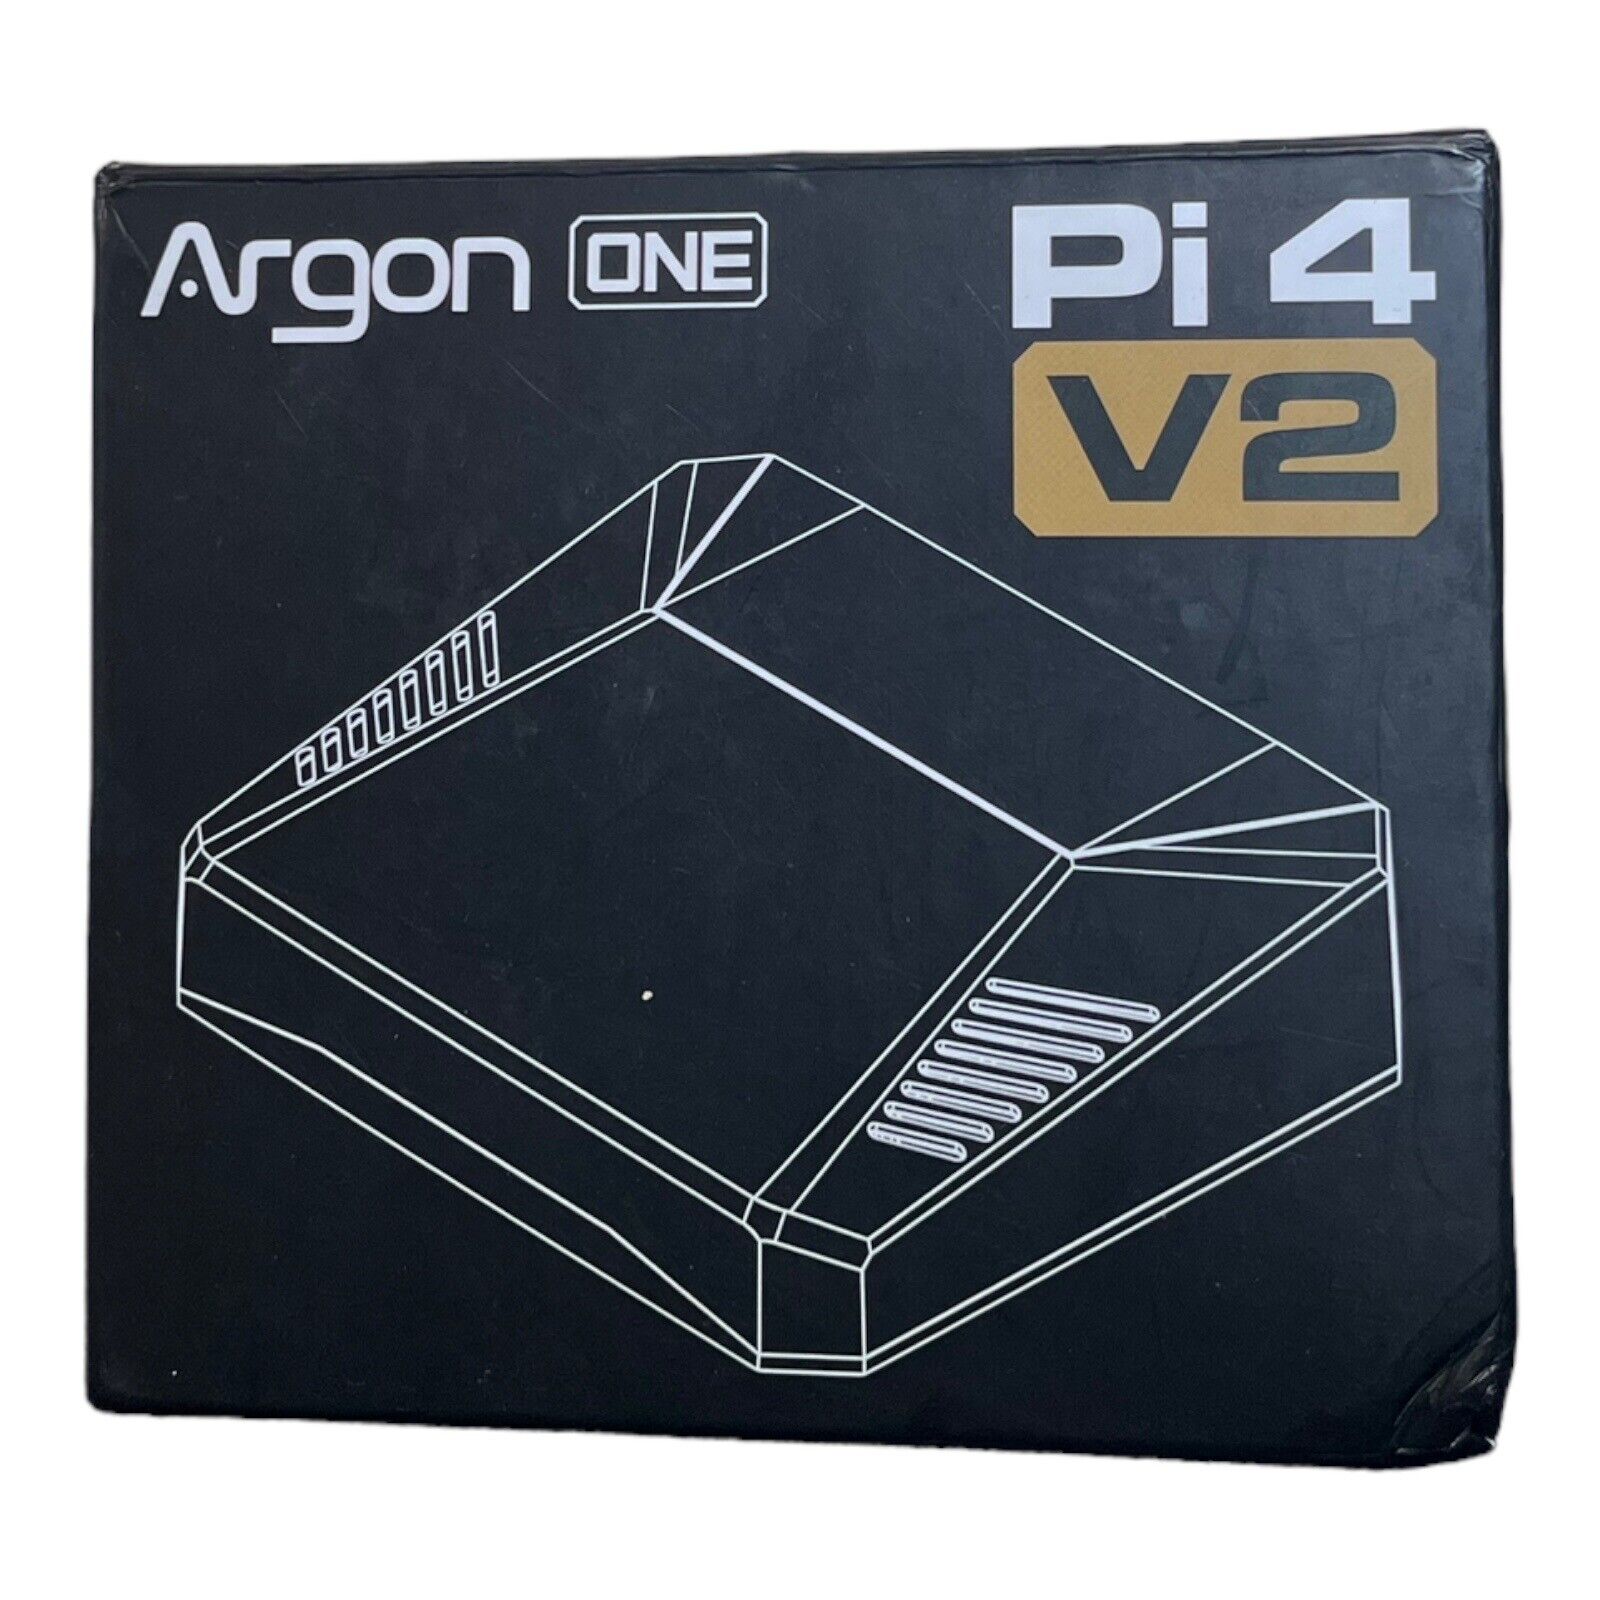 Argon ONE V2 Raspberry Pi 4 Case with Cooling Fan and Power Button